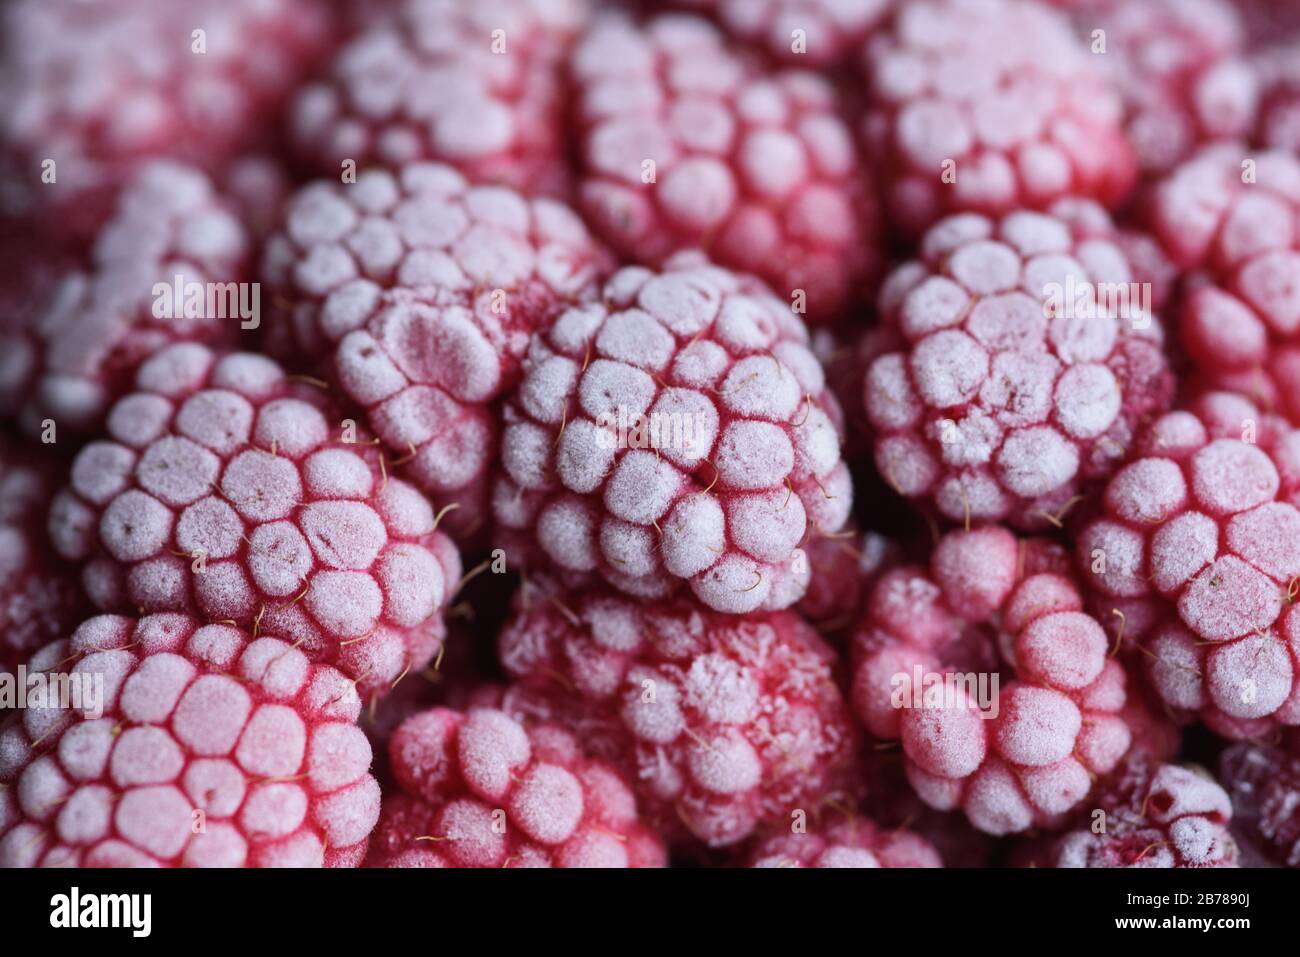 Food background. Freshly frozen raspberries, turned into a juicy piece of ice during freezing. Stock Photo